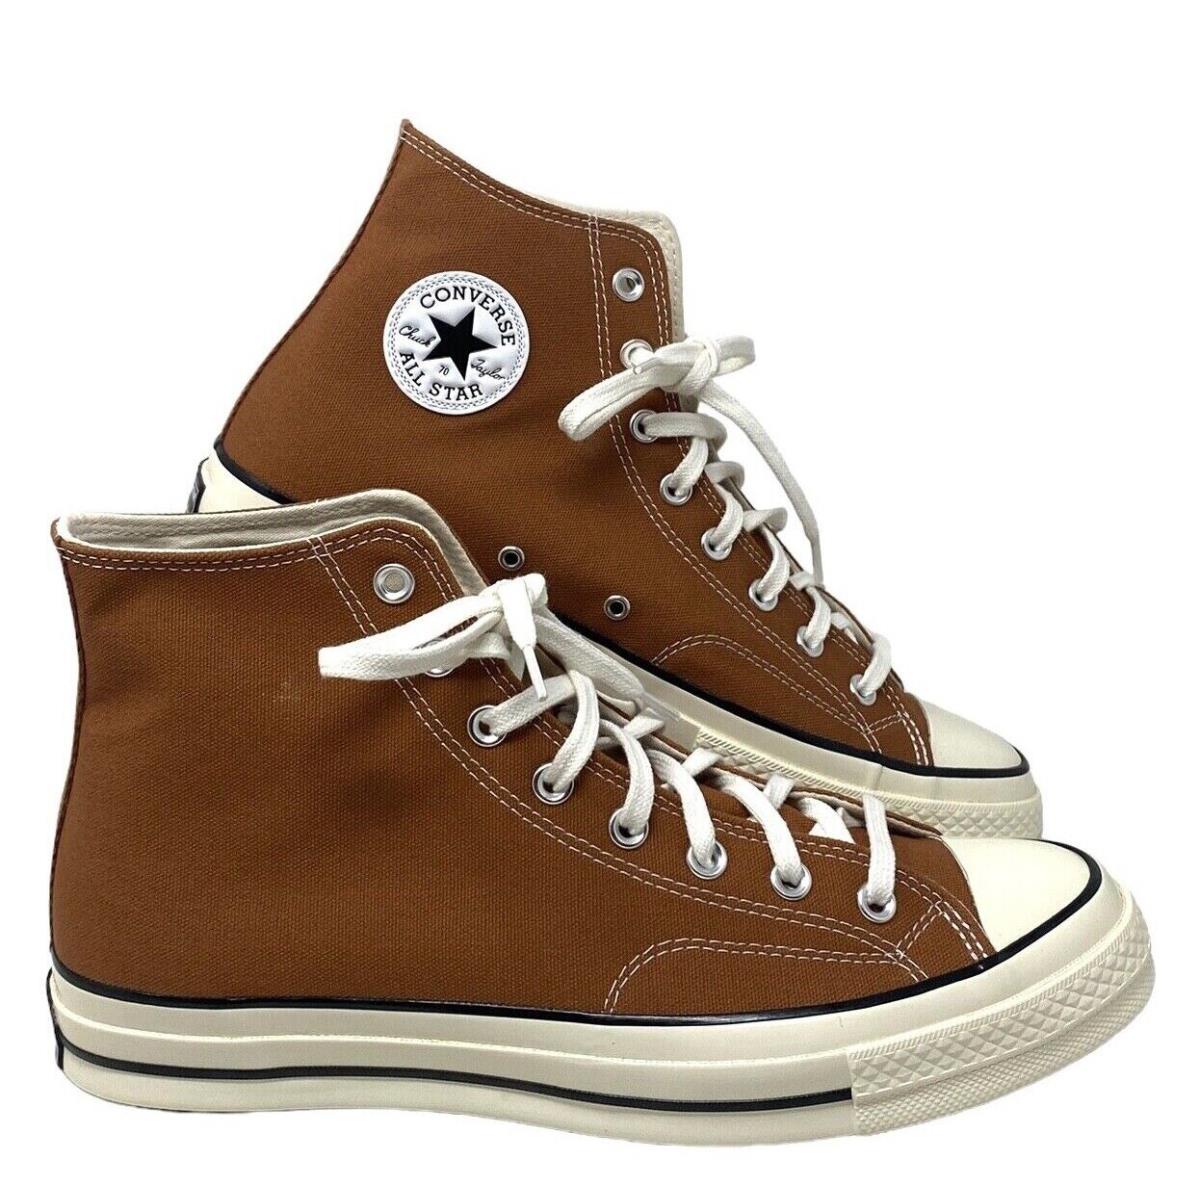 Converse Chuck 70 Tawny Owl For Men Shoes High Top Skate Canvas Sneakers A04588C